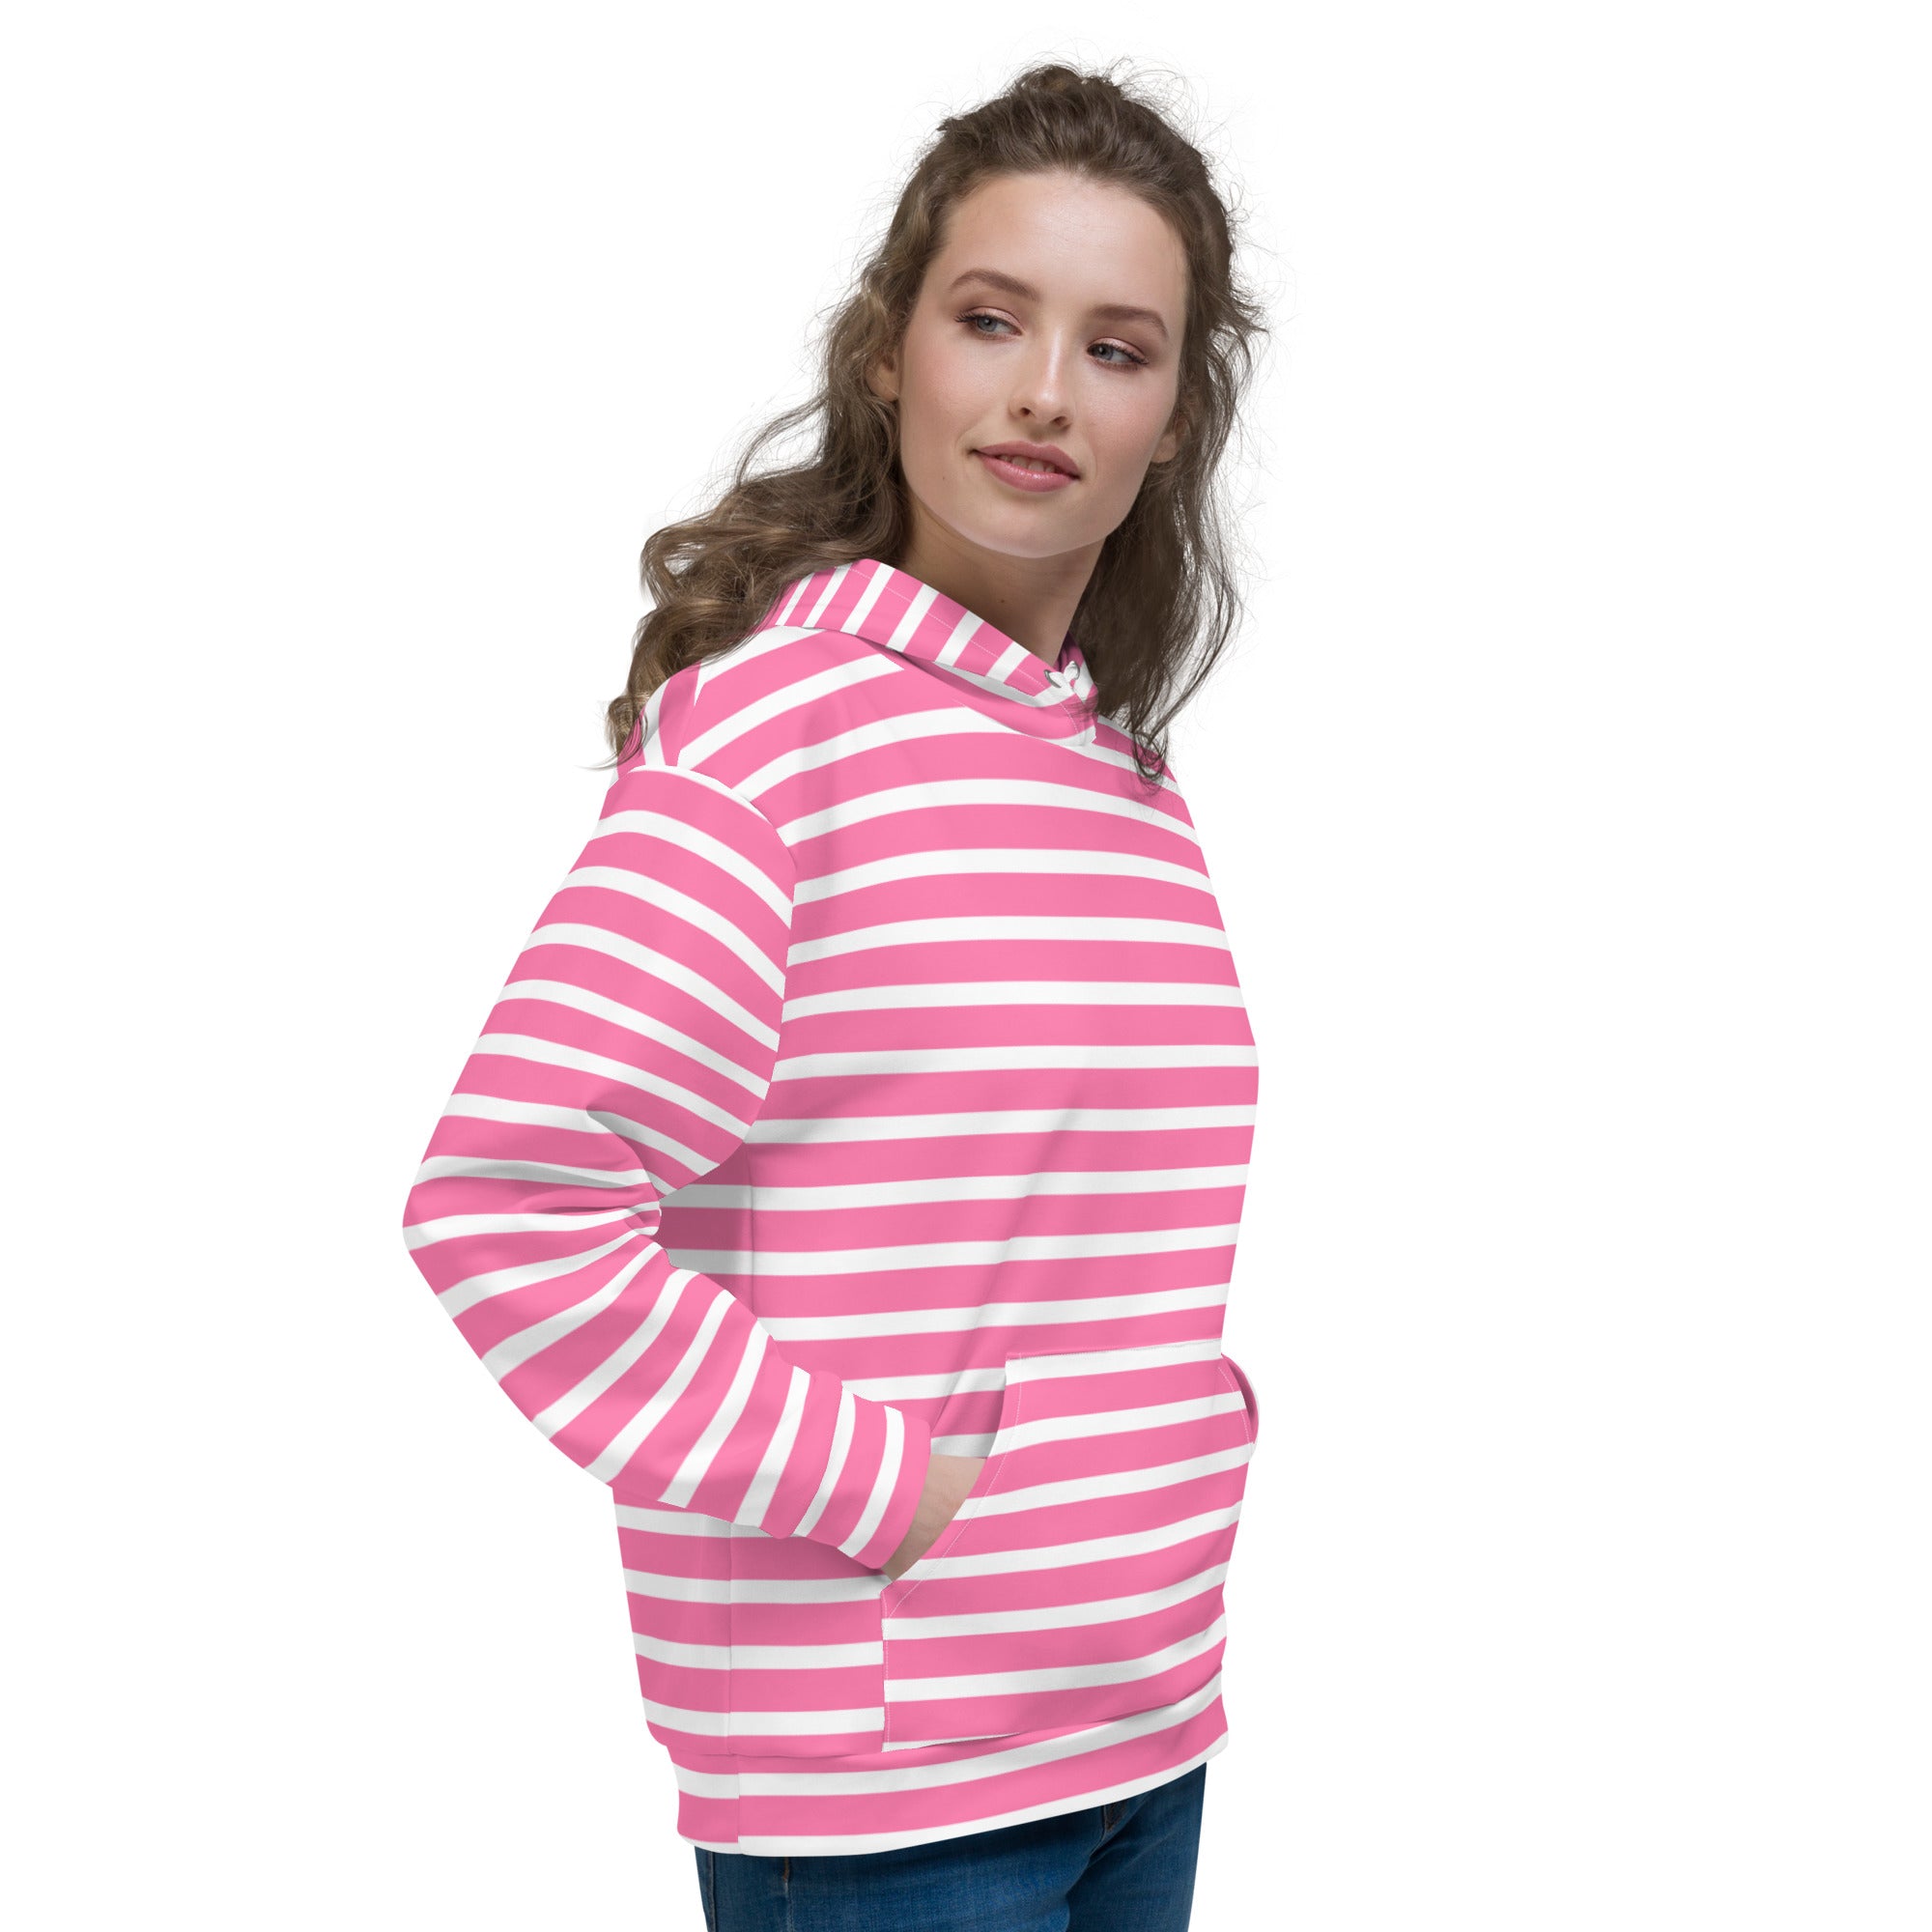 Unisex Hoodie- White and Pink Striped